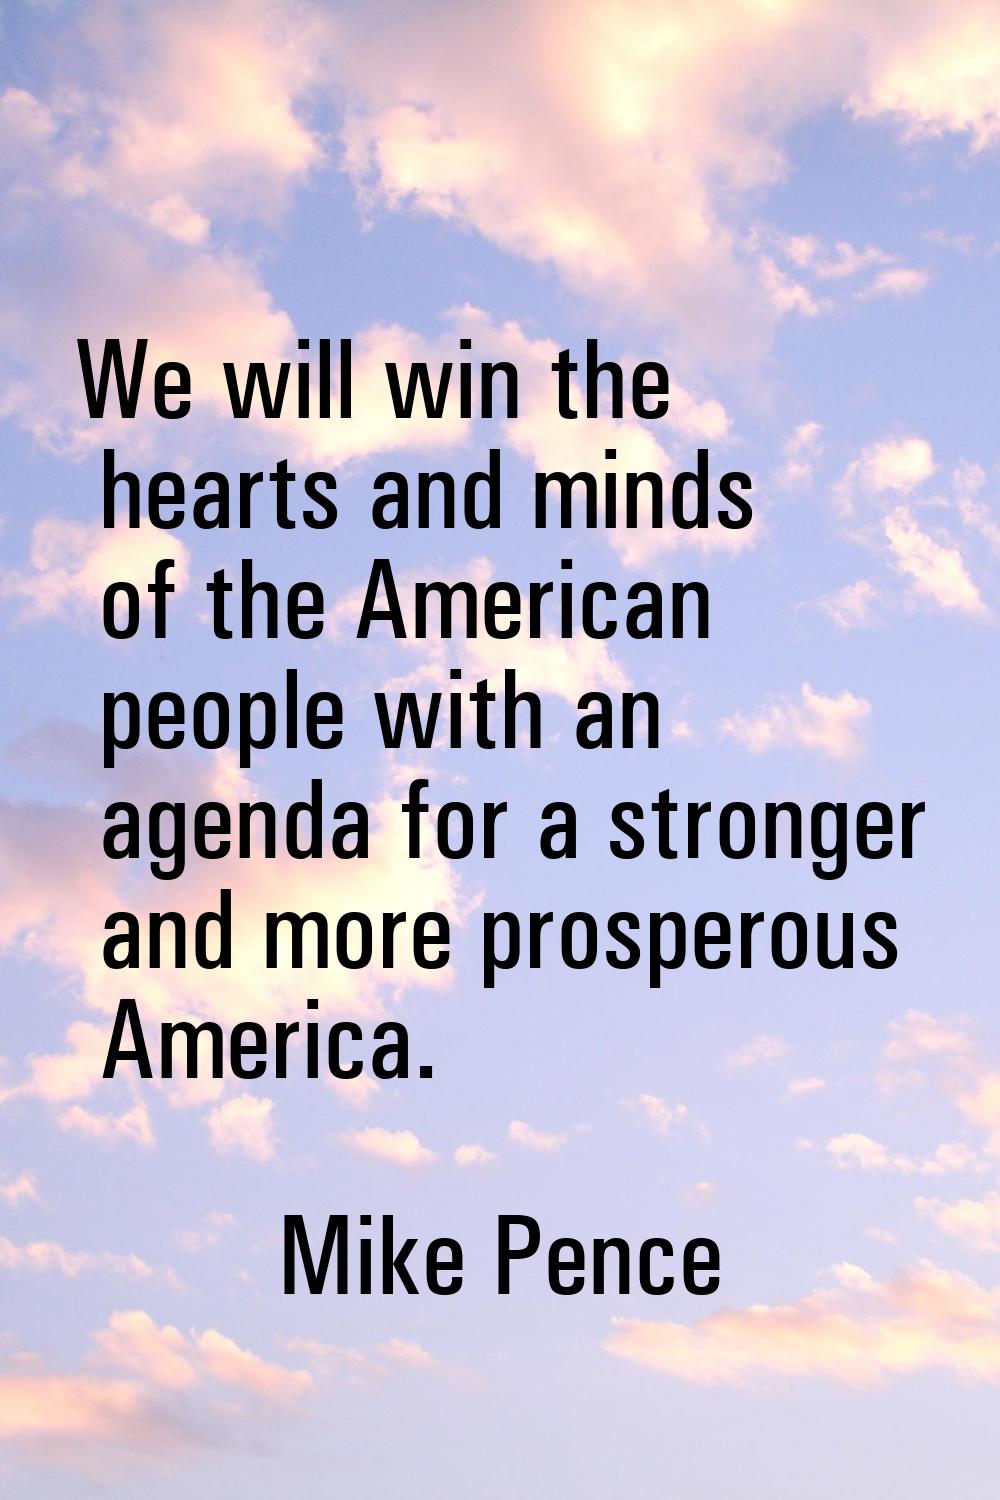 We will win the hearts and minds of the American people with an agenda for a stronger and more pros